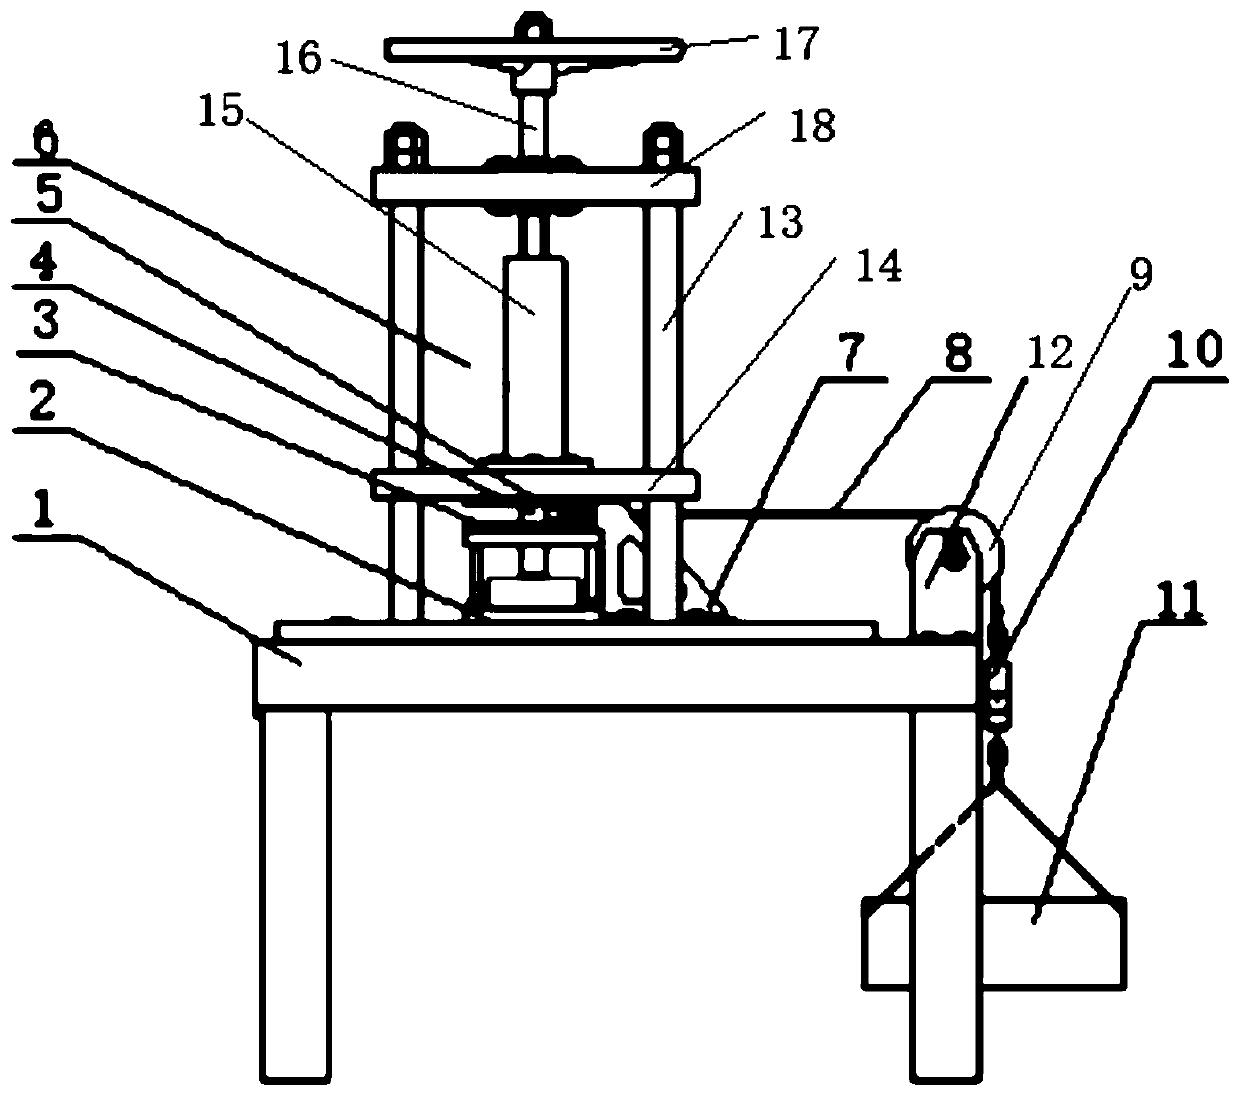 A heavy-duty multi-condition friction testing machine